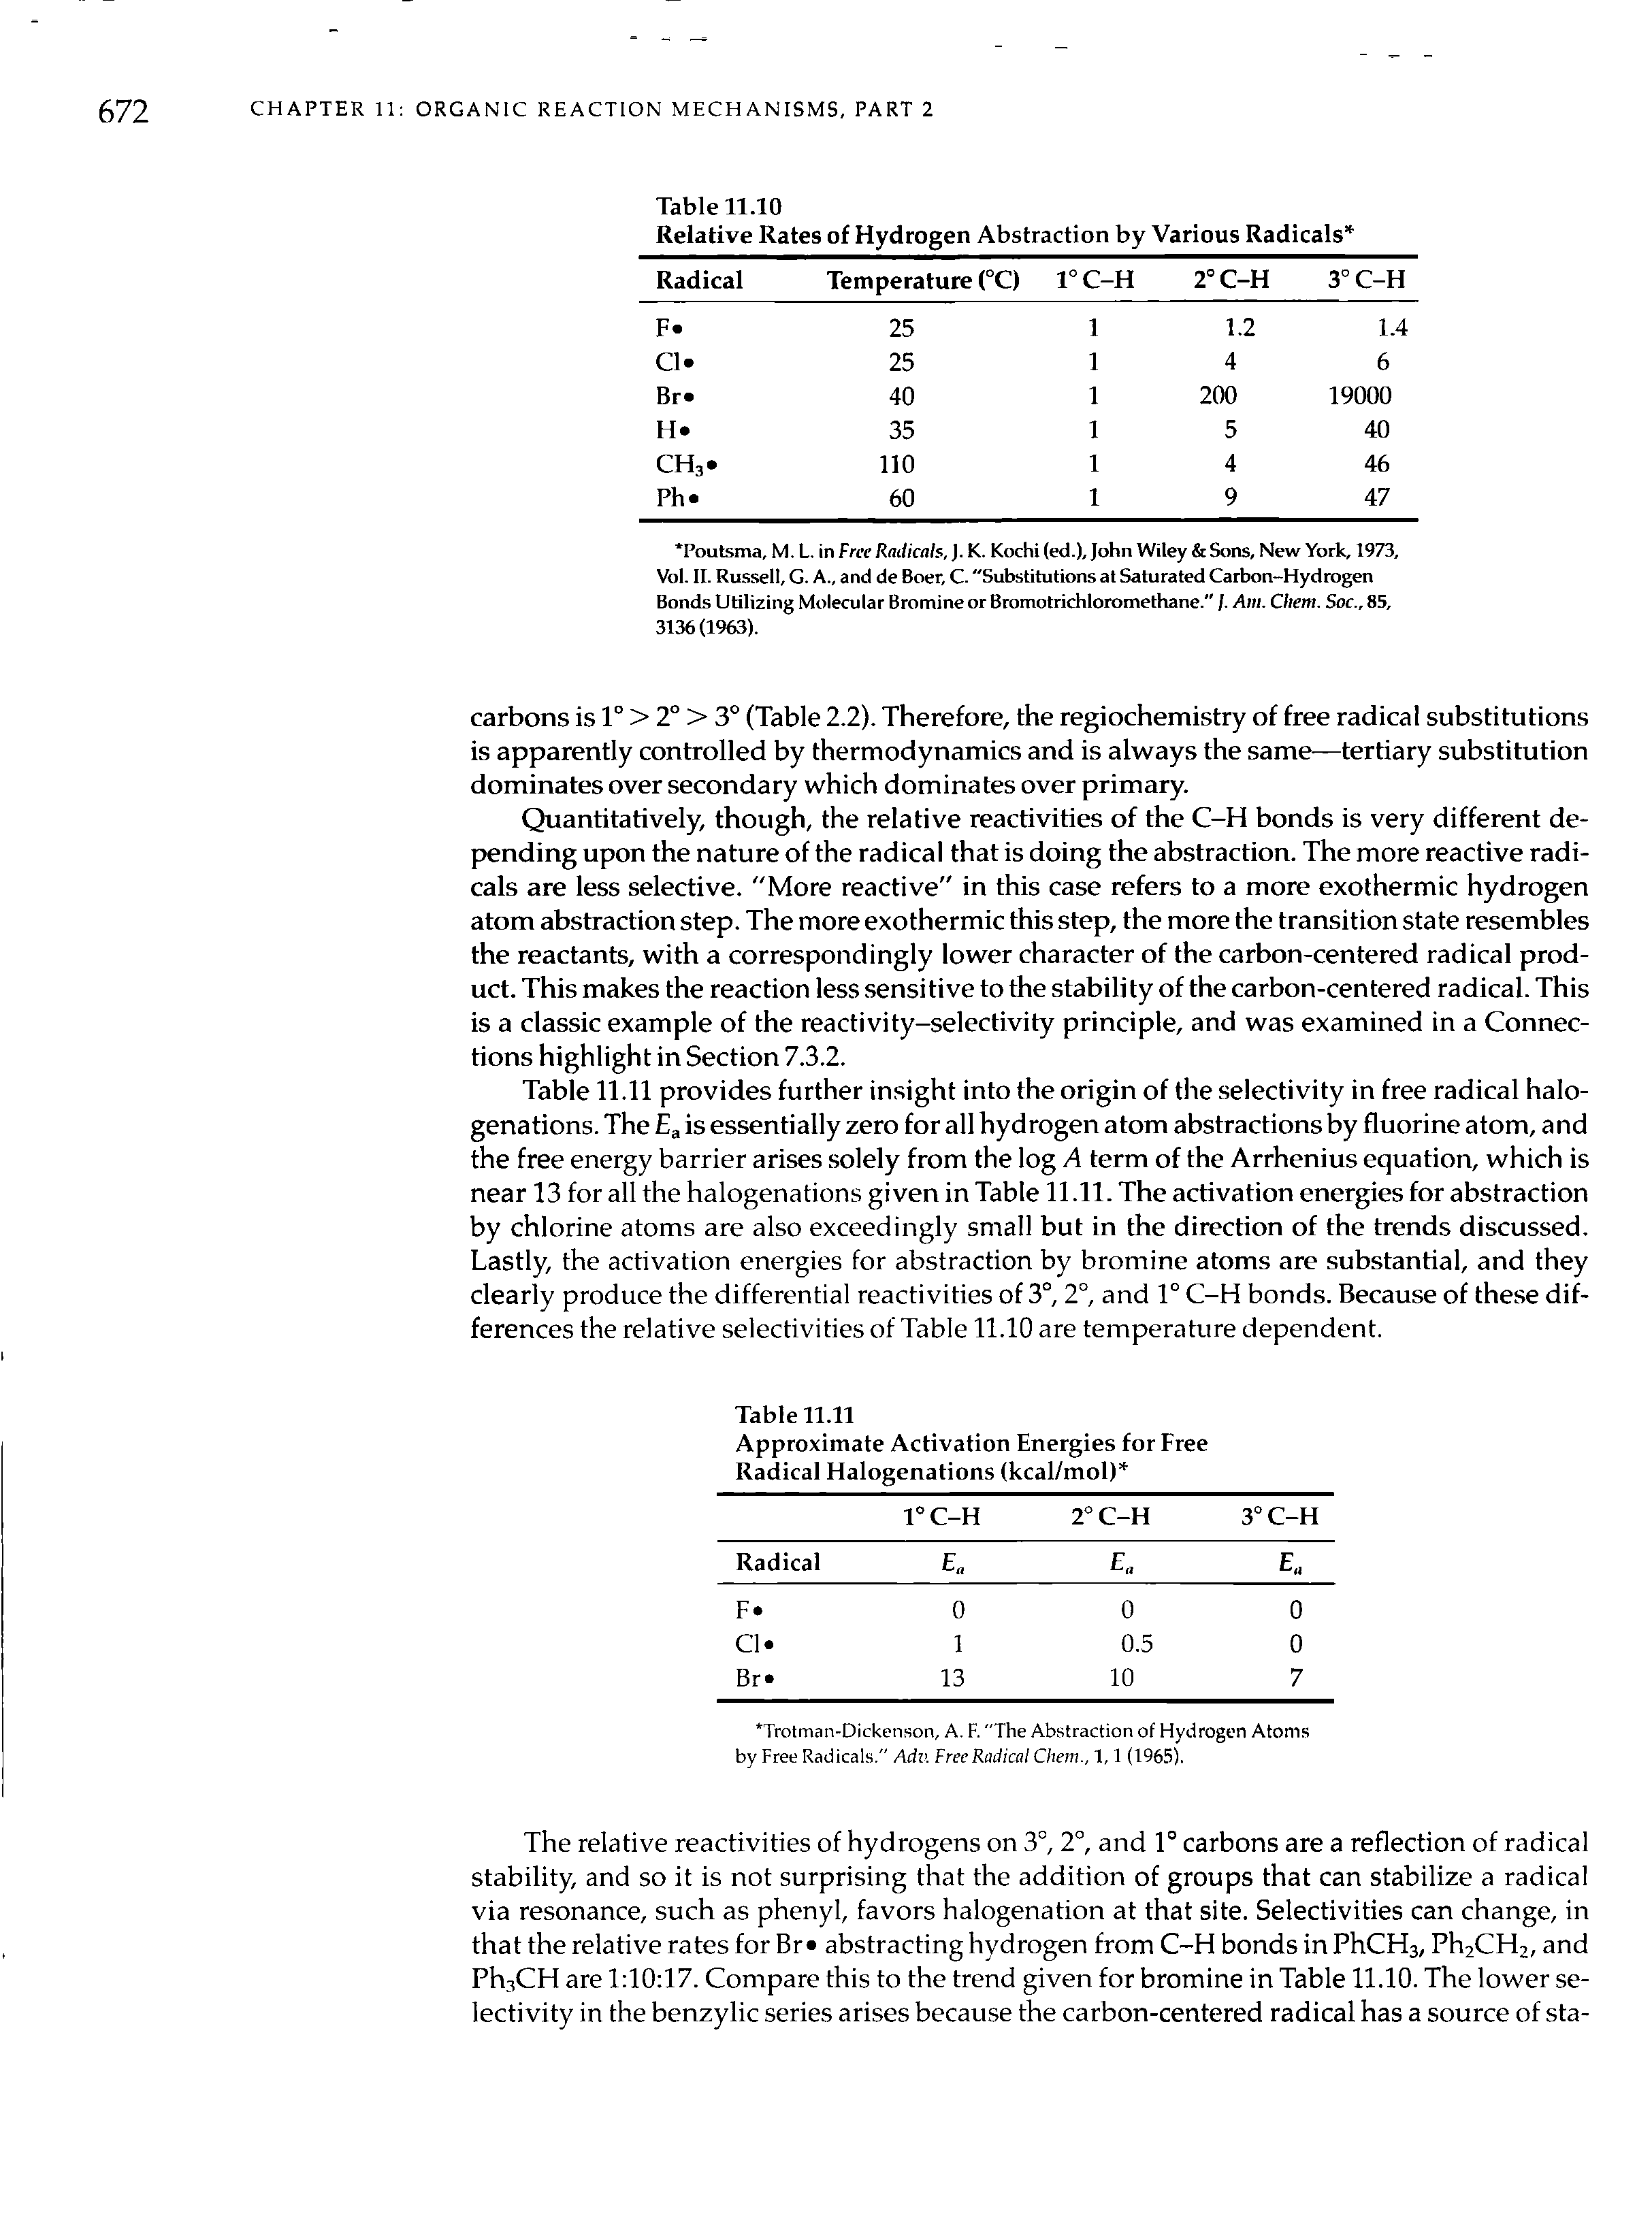 Table 11.11 provides further insight into the origin of the selectivity in free radical halo-genations. The is essentially zero for all hydrogen atom abstractions by fluorine atom, and the free energy barrier arises solely from the log A term of the Arrhenius equation, which is near 13 for all the halogenations given in Table 11.11. The activation energies for abstraction by chlorine atoms are also exceedingly small but in the direction of the trends discussed. Lastly, the activation energies for abstraction by bromine atoms are substantial, and they clearly produce the differential reactivities of 3°, 2°, and 1° C-H bonds. Because of these differences the relative selectivities of Table 11.10 are temperature dependent.